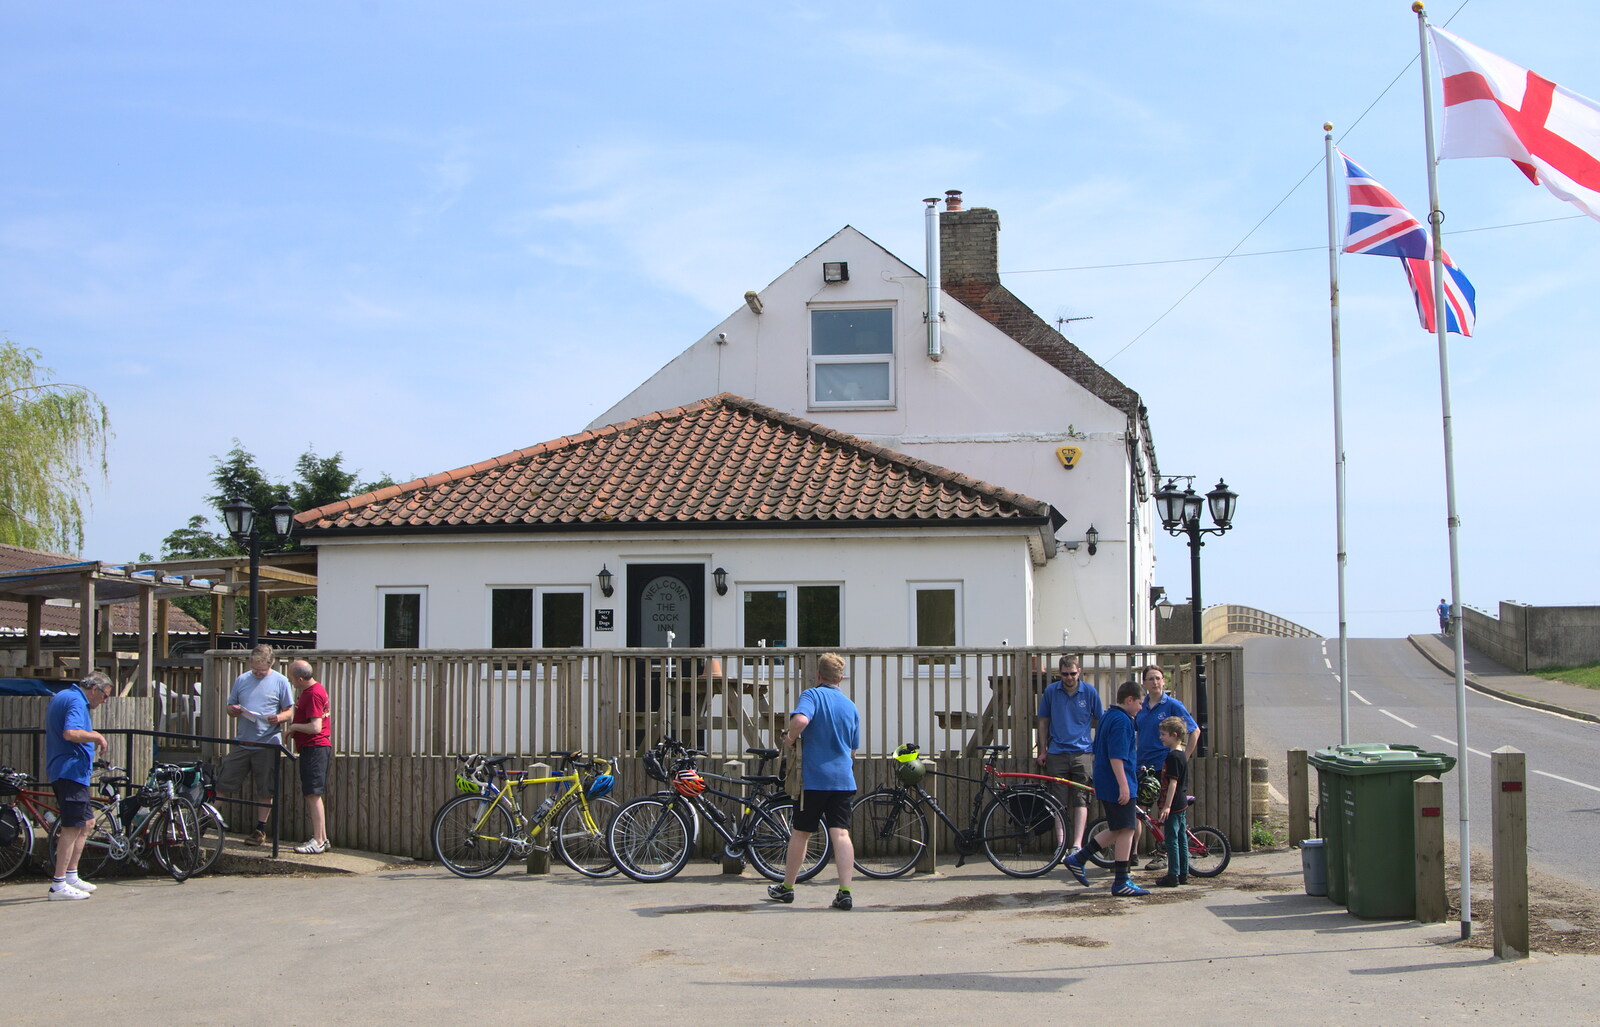 The Cock Inn at Wiggenhall St. Mary Magdalen from The BSCC Cycling Weekender, Outwell, West Norfolk - 7th May 2016